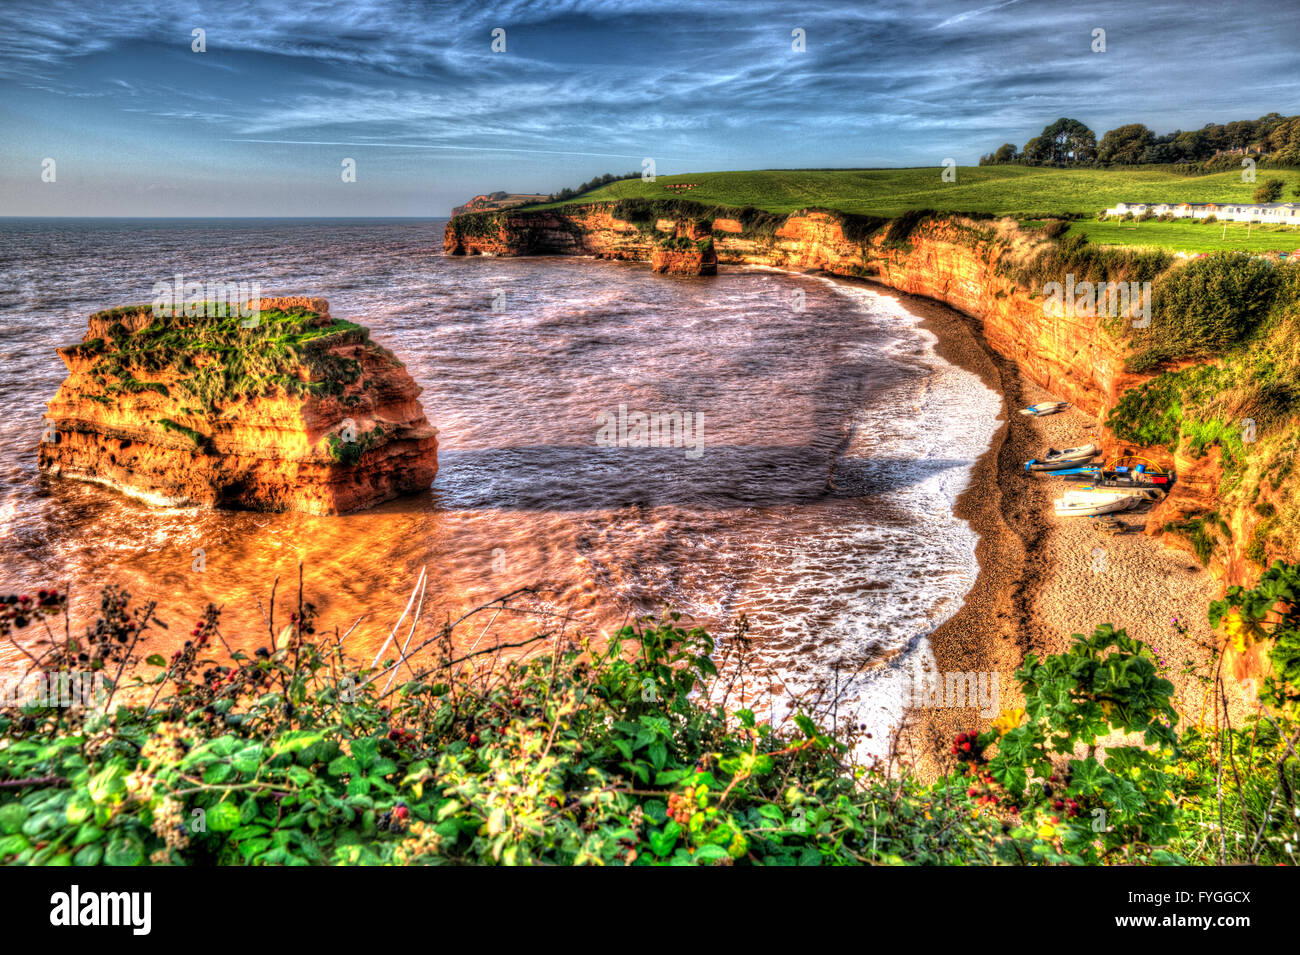 Ladram Bay beach Devon England UK located between Budleigh Salterton and Sidmouth and on the Jurassic Coast in HDR Stock Photo